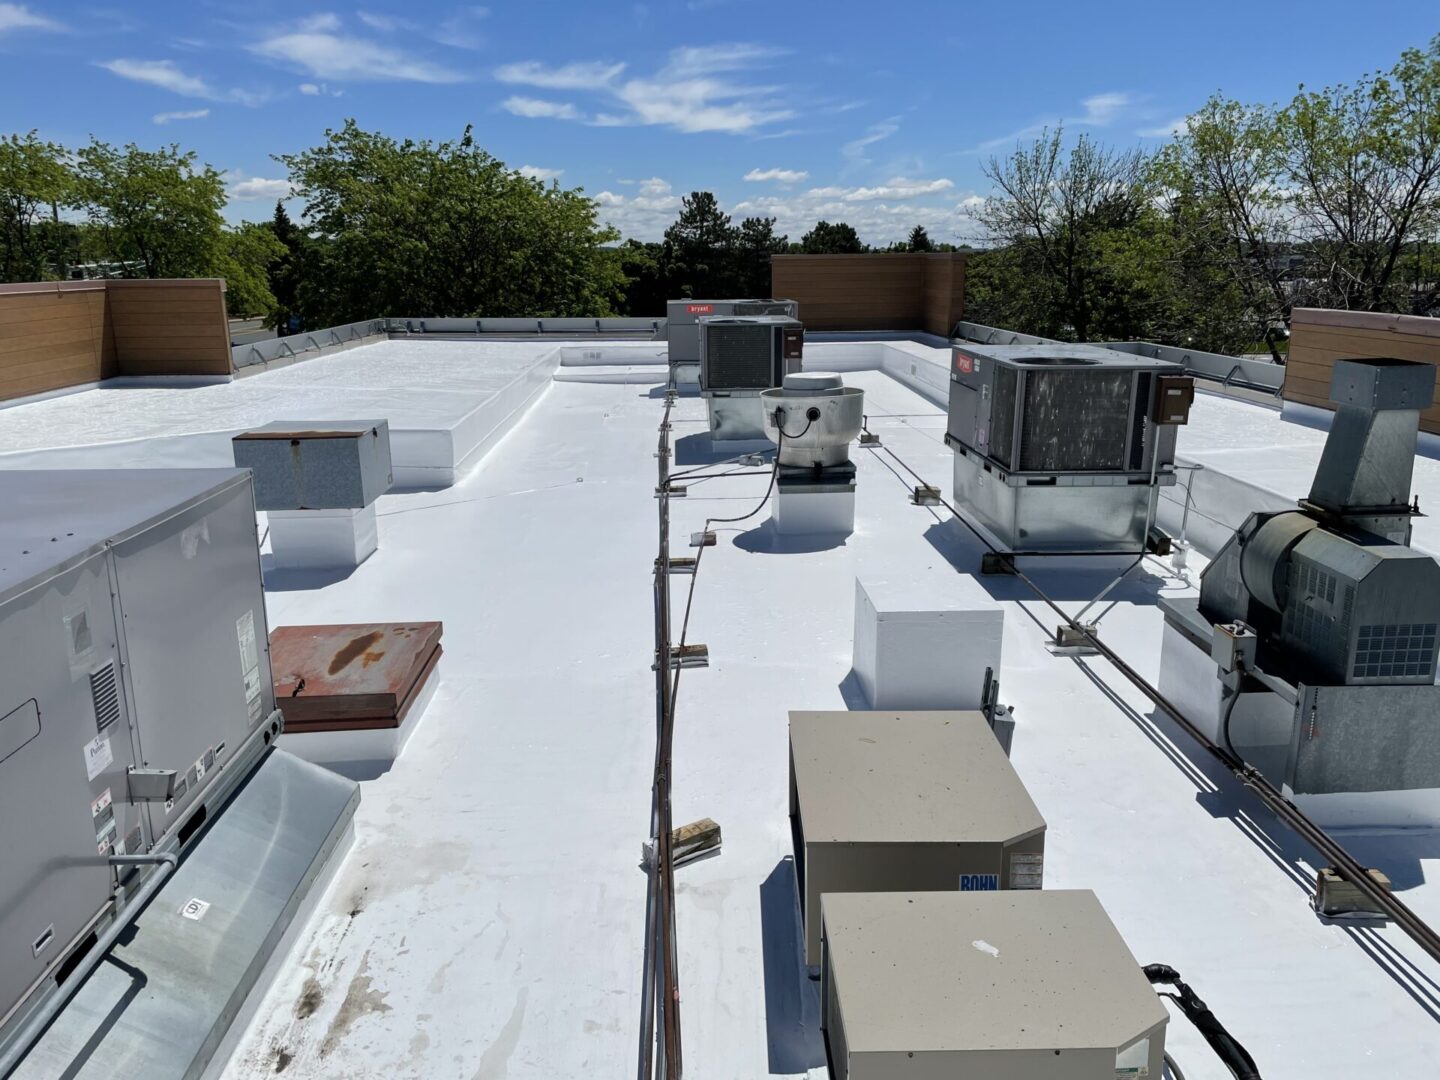 Industrial roof level with machines, vents, and insulation